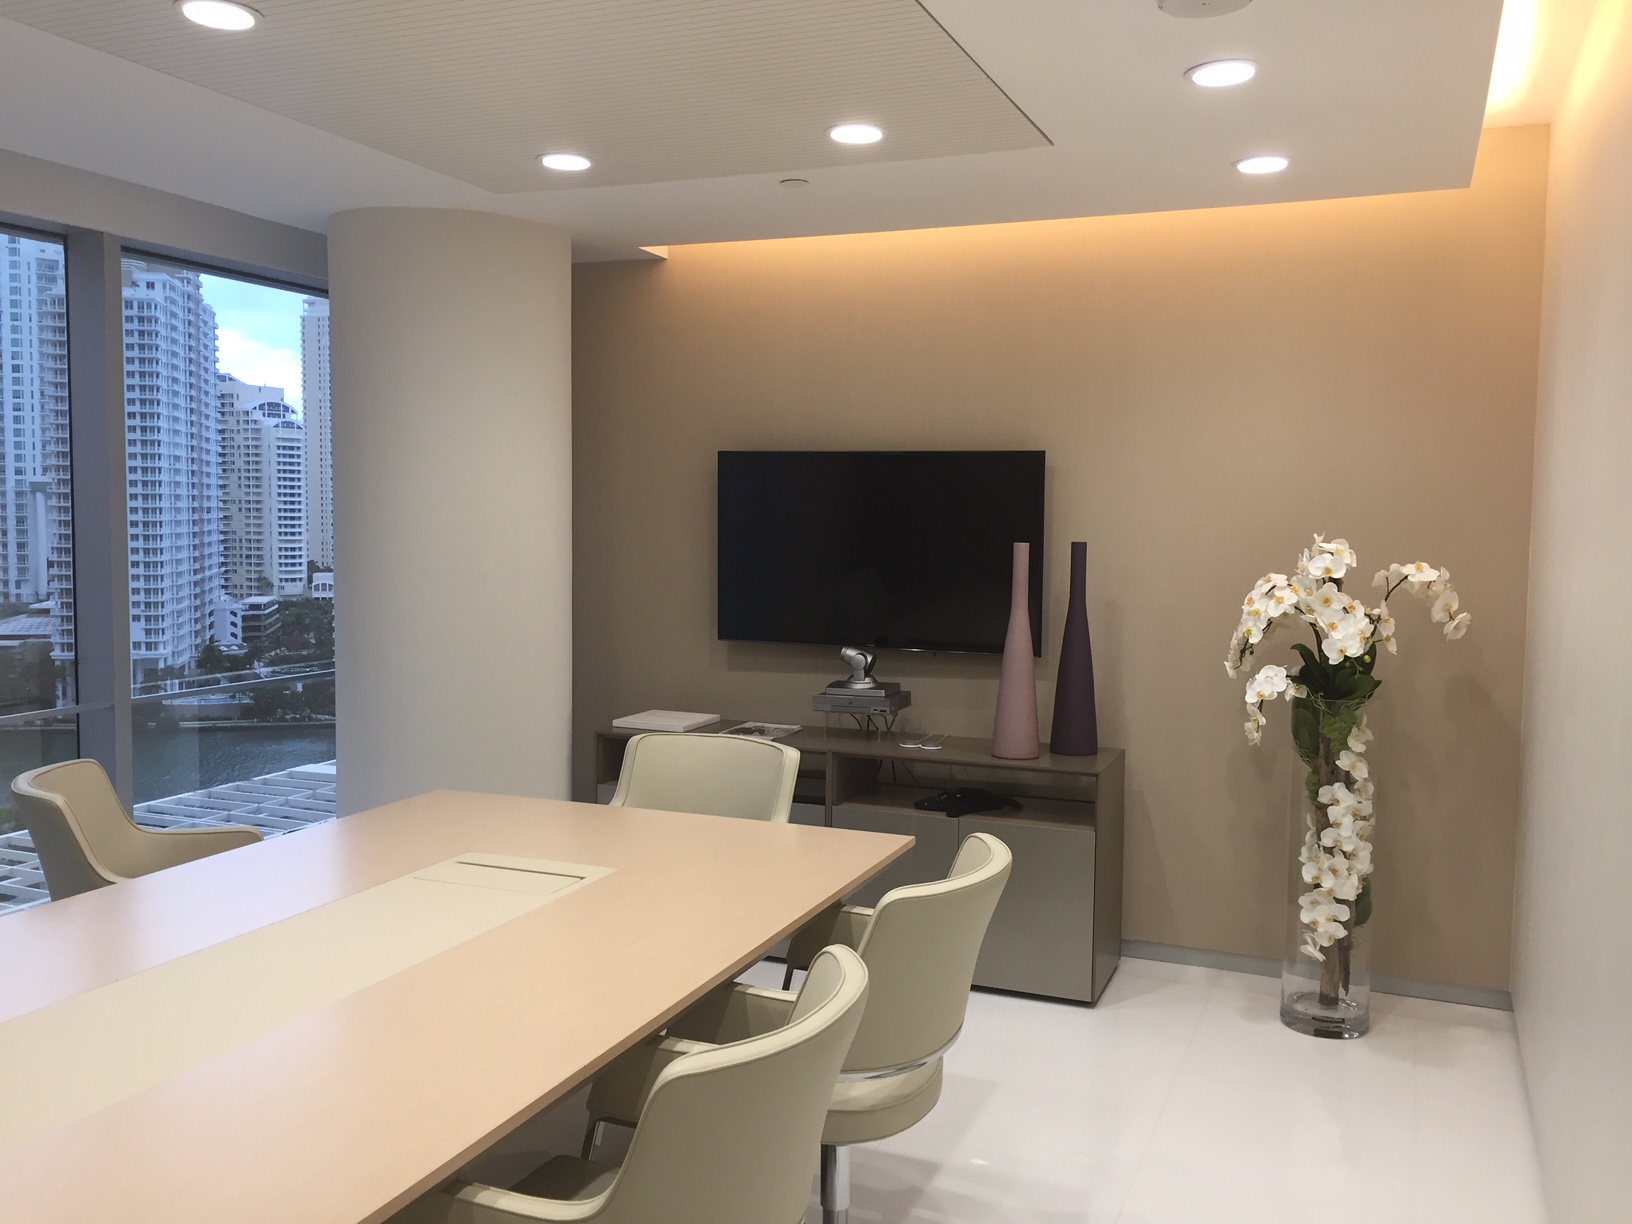 4 Galow Private Bank Interior Design Luxury Meeting Room